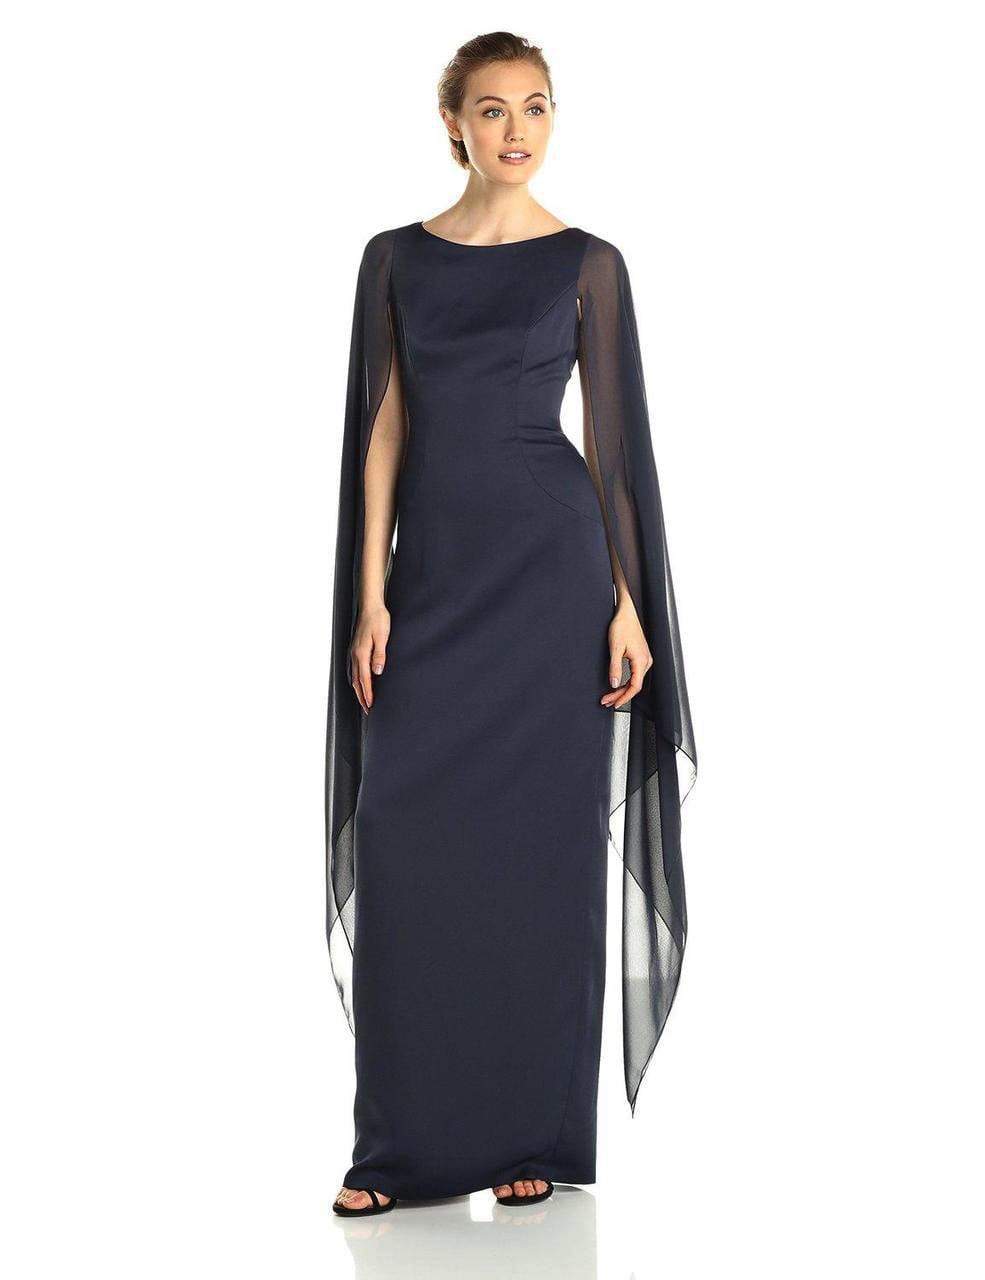 Image of Adrianna Papell - 81917310 Fitted Bateau Dress with Cape